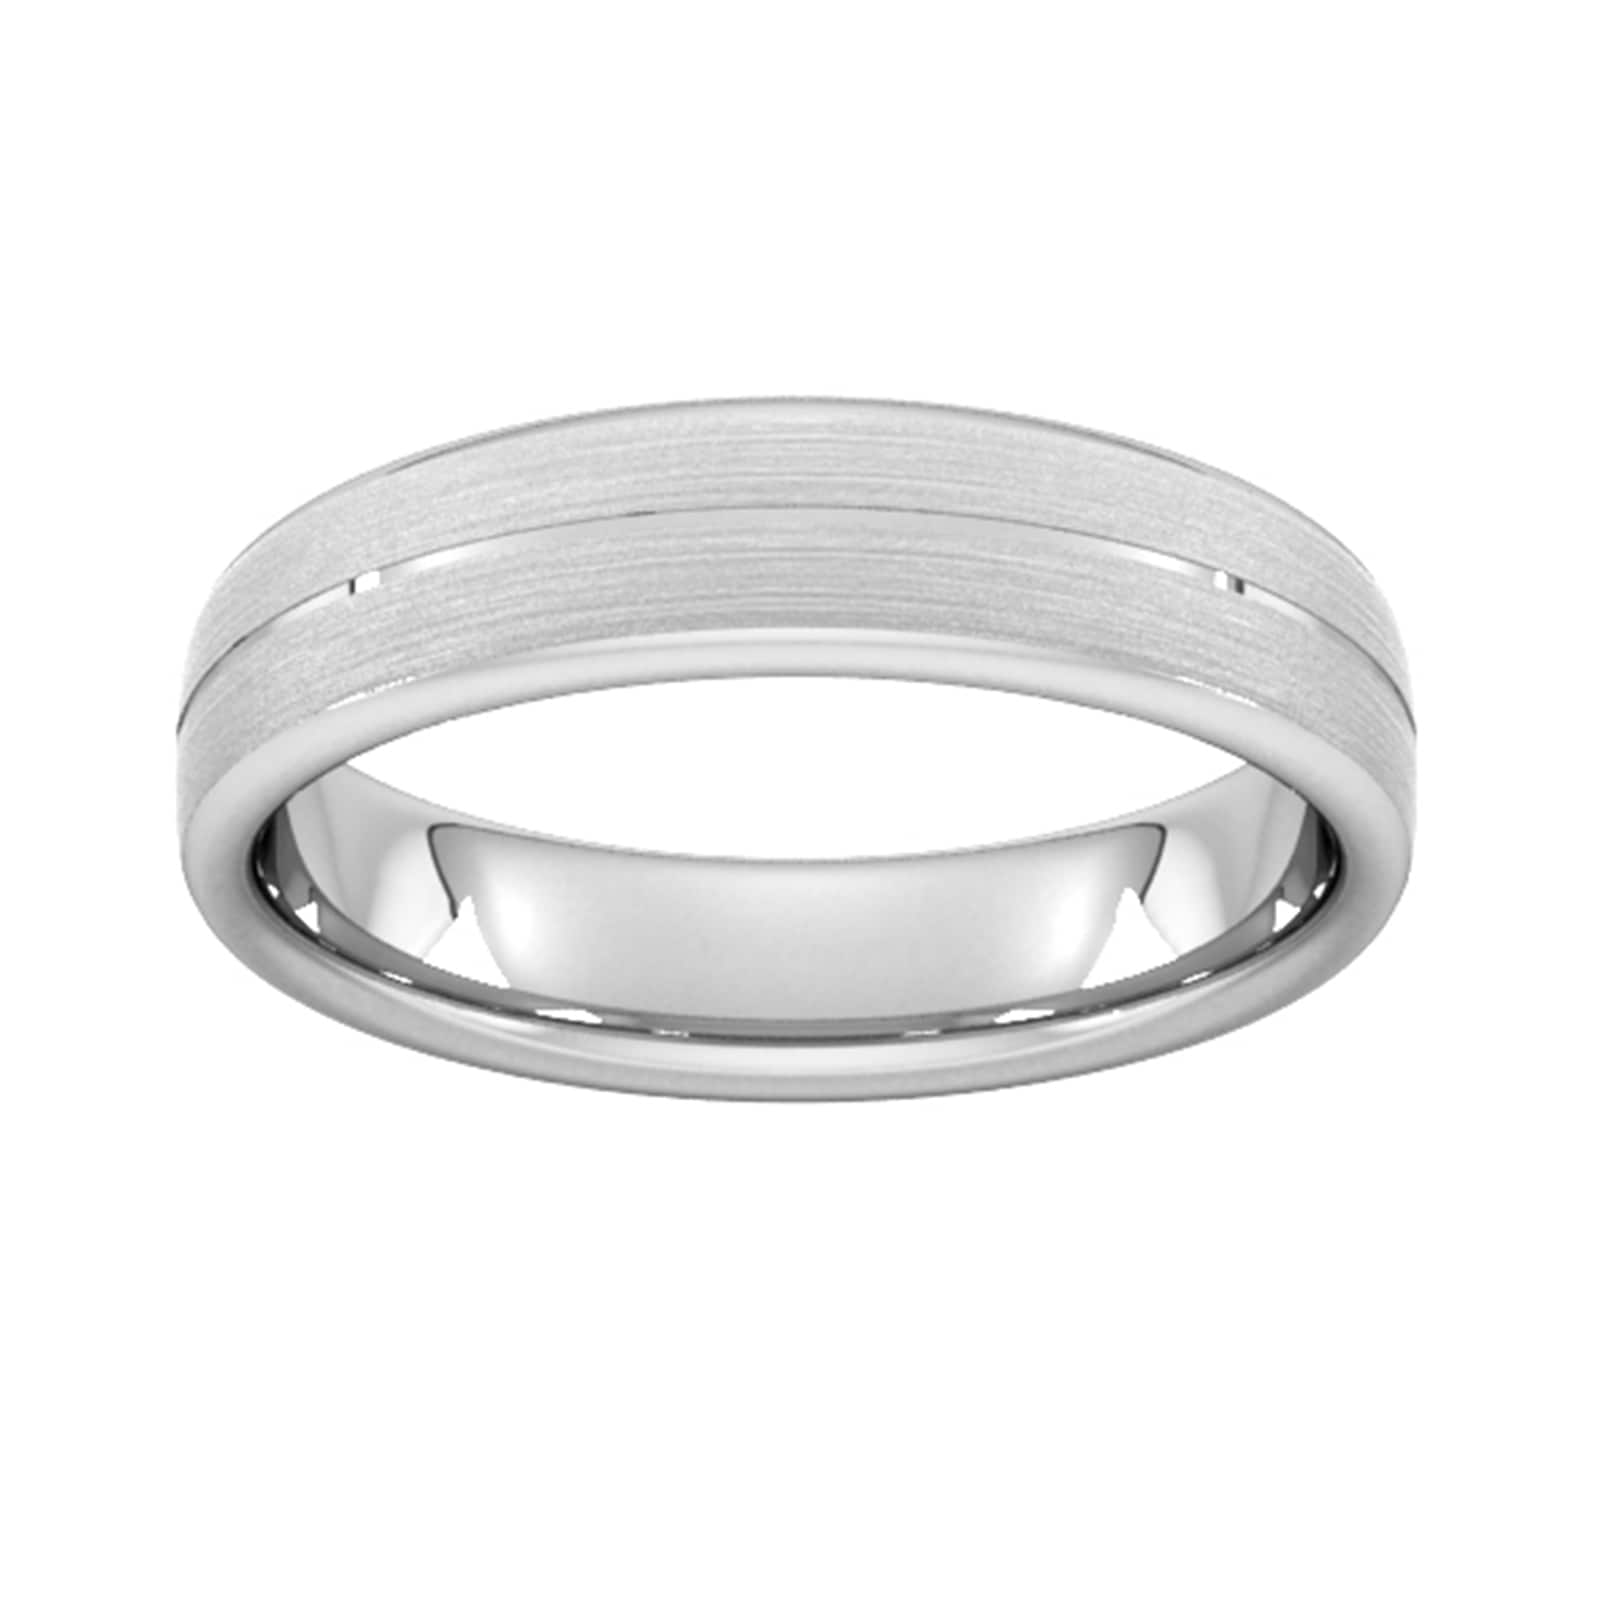 5mm Slight Court Extra Heavy Centre Groove With Chamfered Edge Wedding Ring In 9 Carat White Gold - Ring Size U